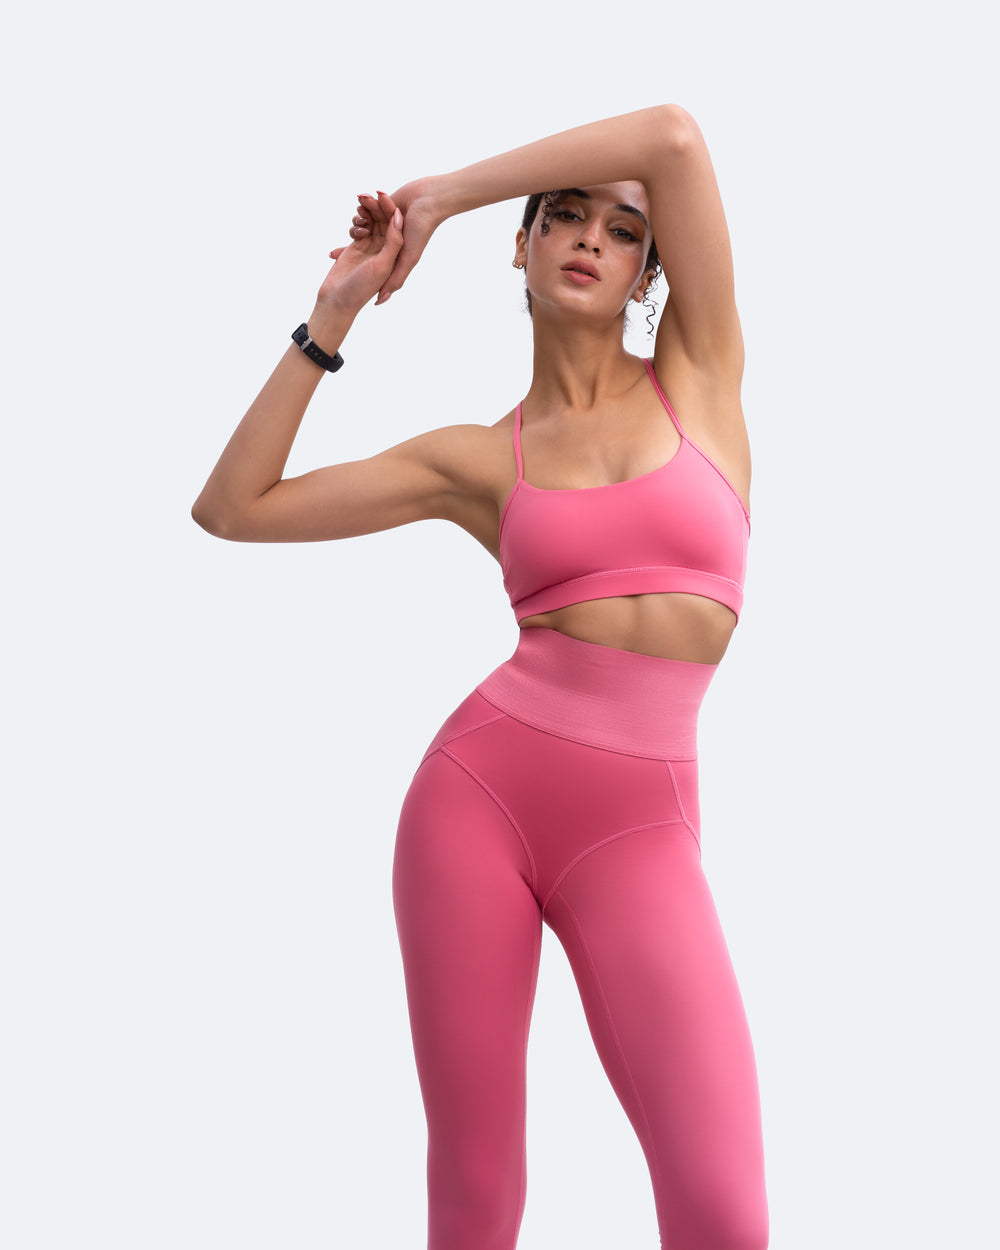 VIBRANT Rusty Pink Full Length Leggings, Seamless Ladies Workout Support